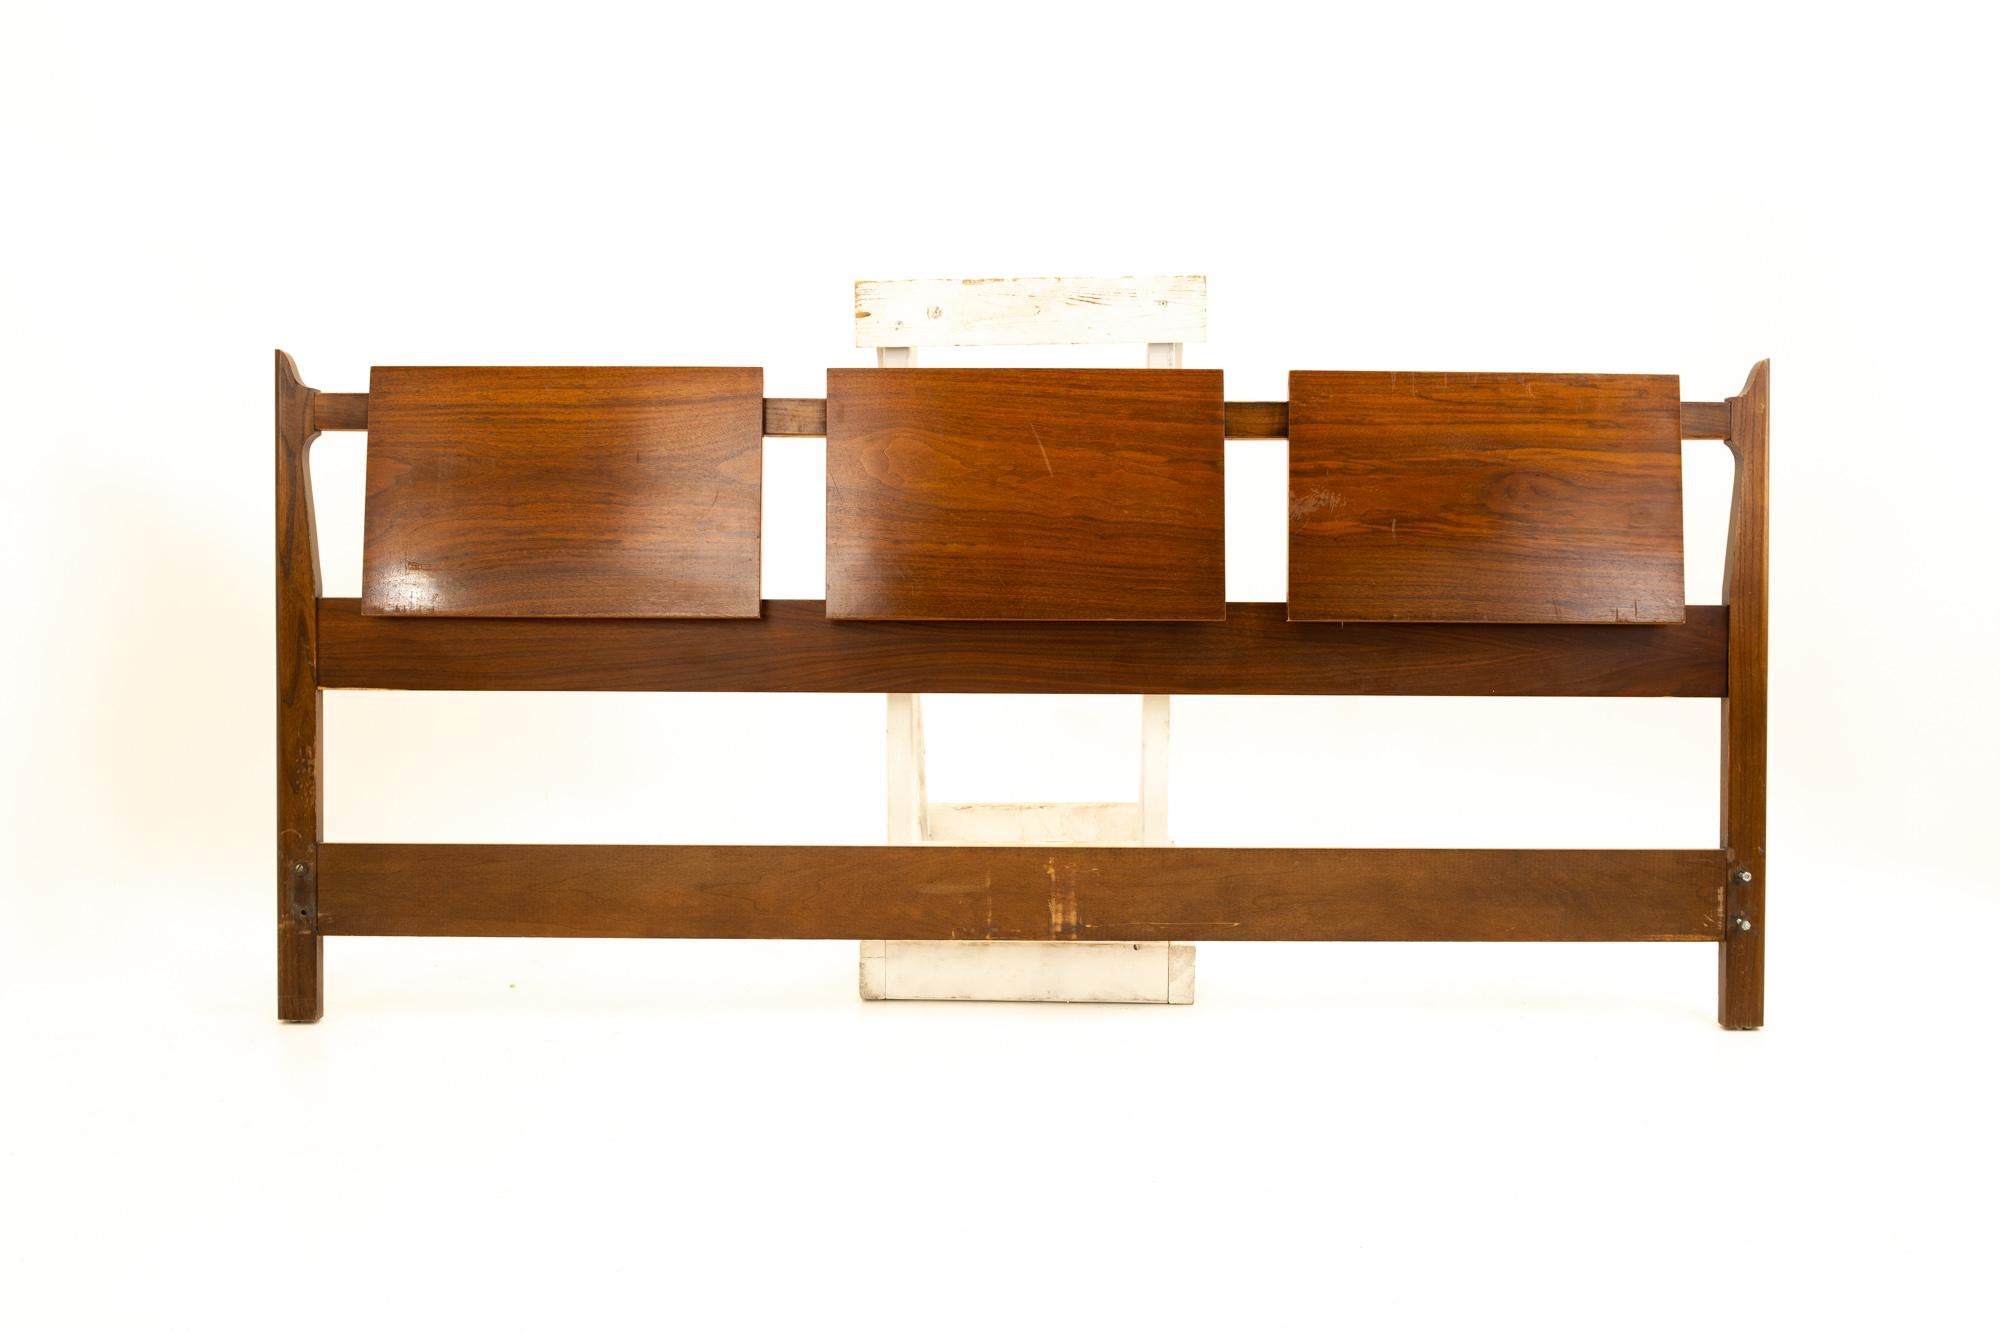 United Furniture Mid Century walnut king headboard
Headboard measures: 80 wide x 3 deep x 36 high

All pieces of furniture can be had in what we call restored vintage condition. That means the piece is restored upon purchase so it’s free of